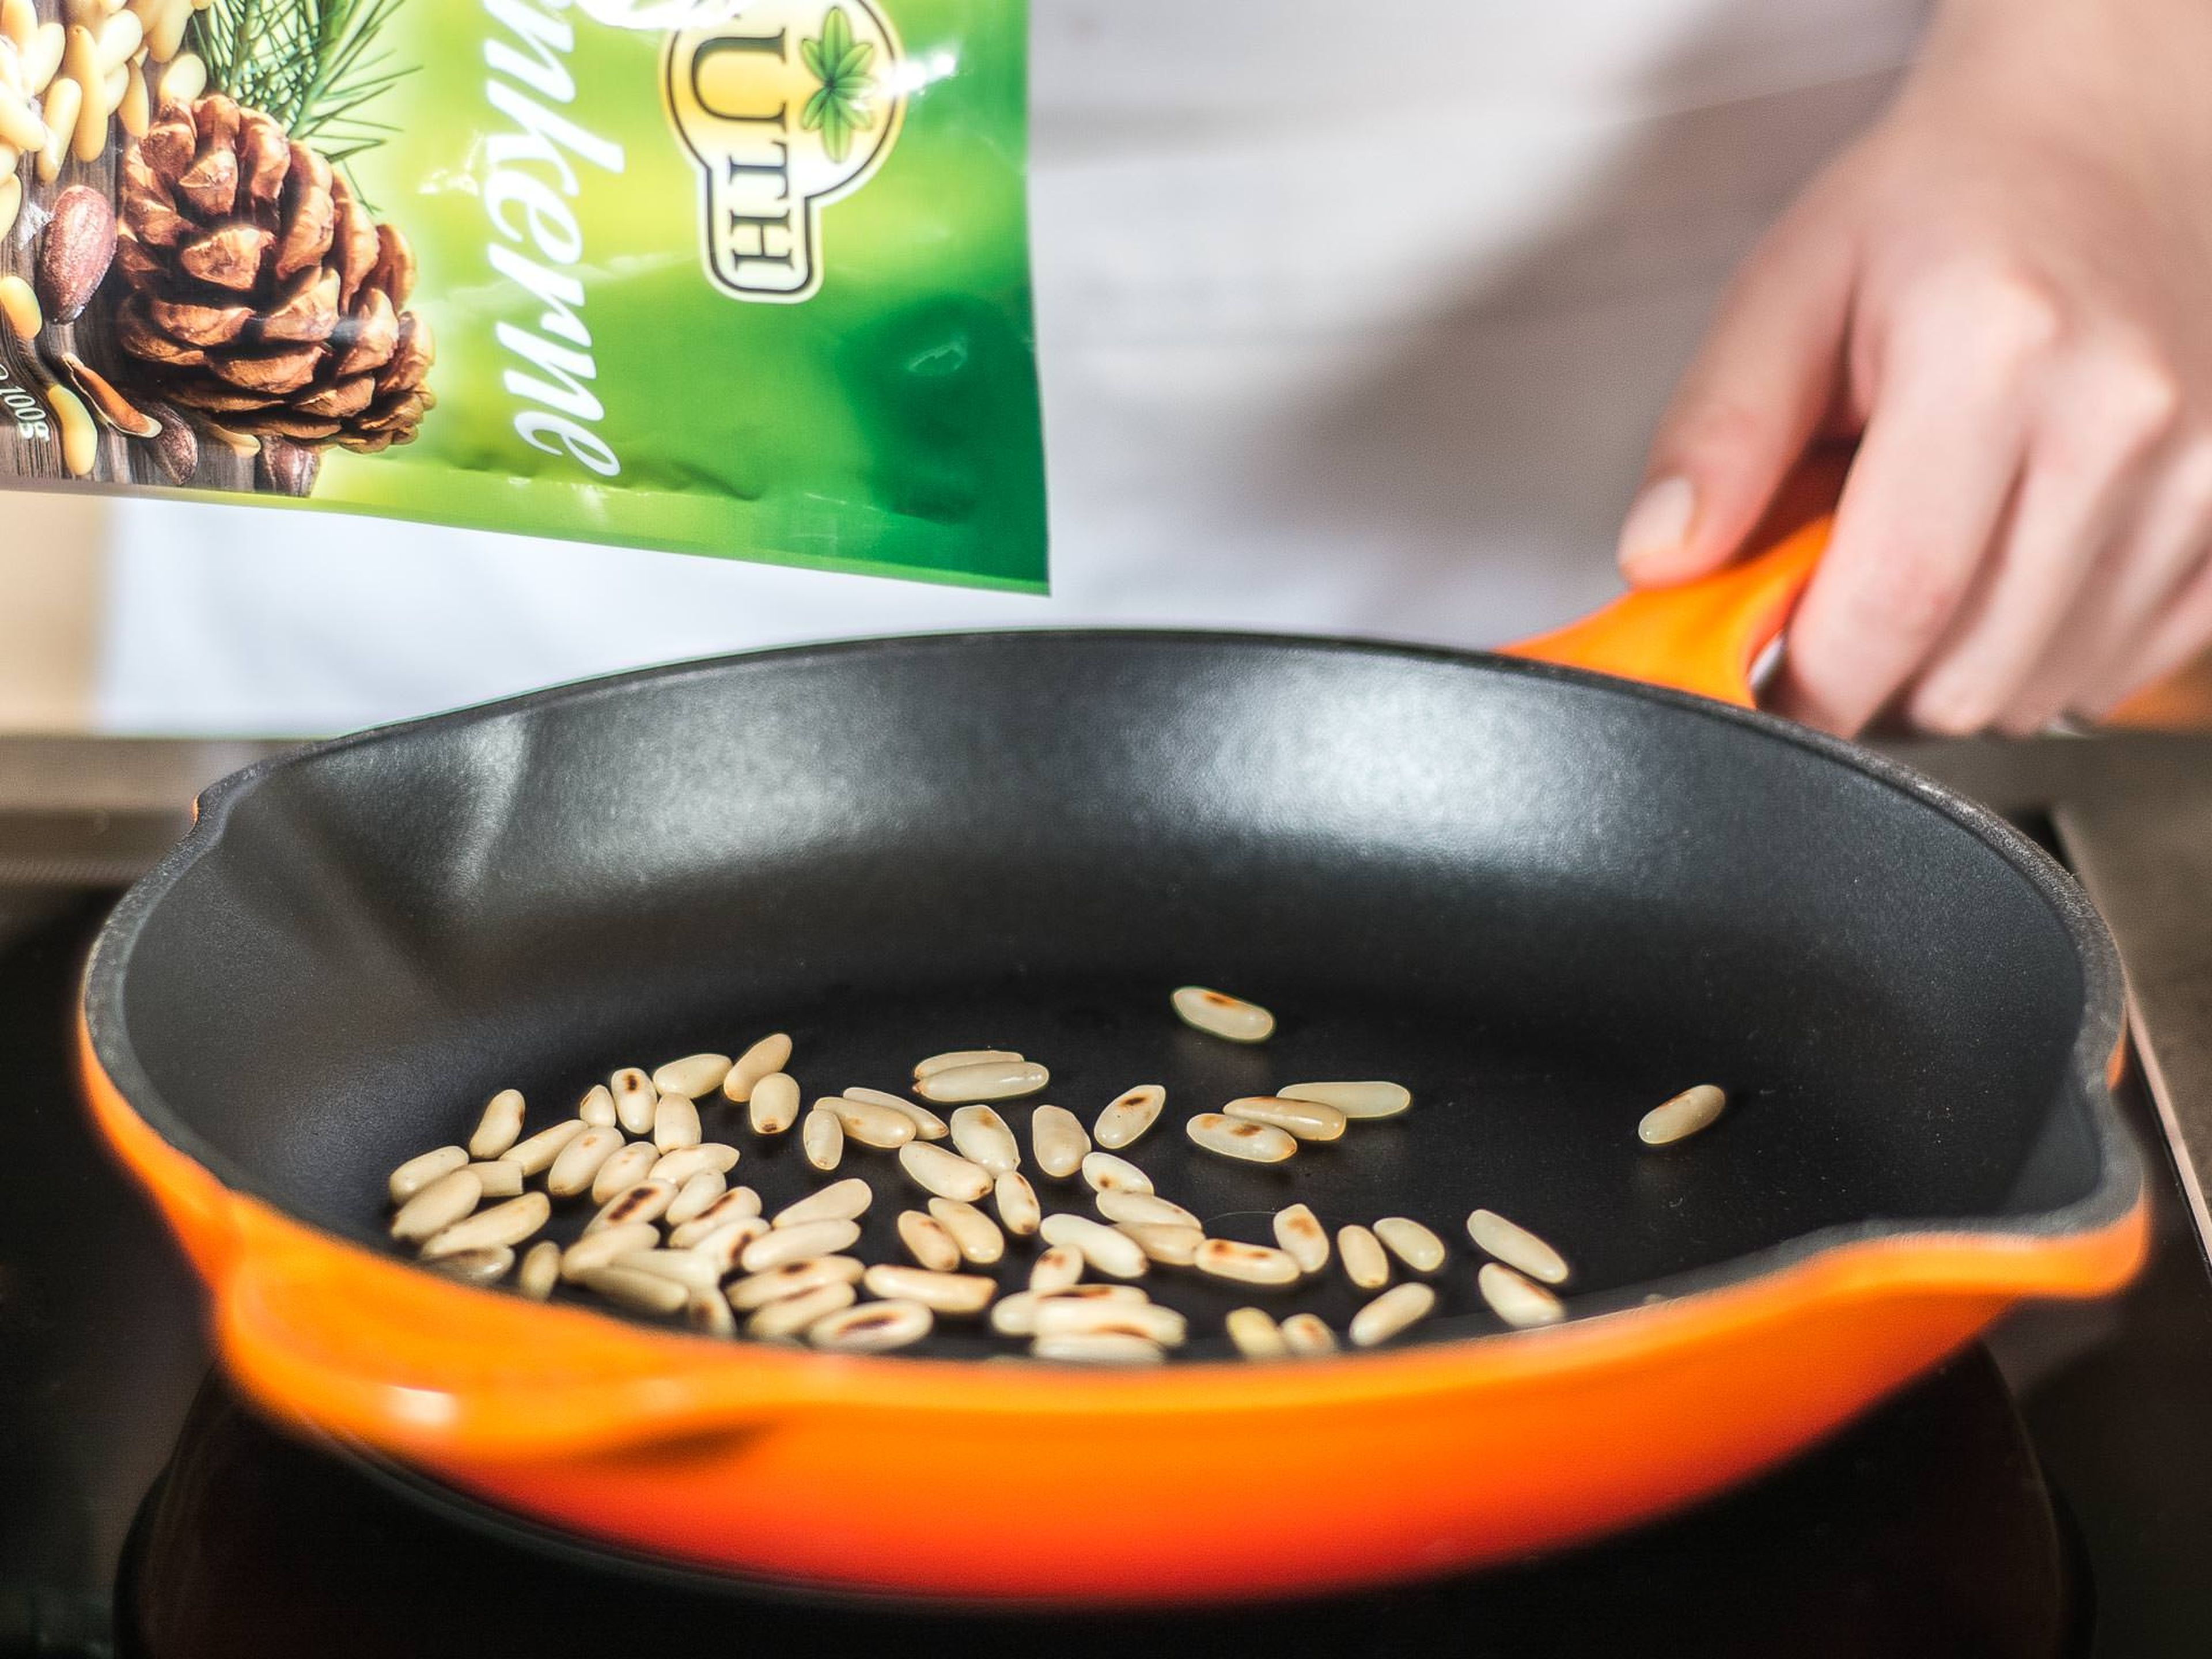 In a grease-free frying pan, toast pine nuts over medium-low heat, stirring often, for approx. 2 - 3 min. until golden brown and fragrant.